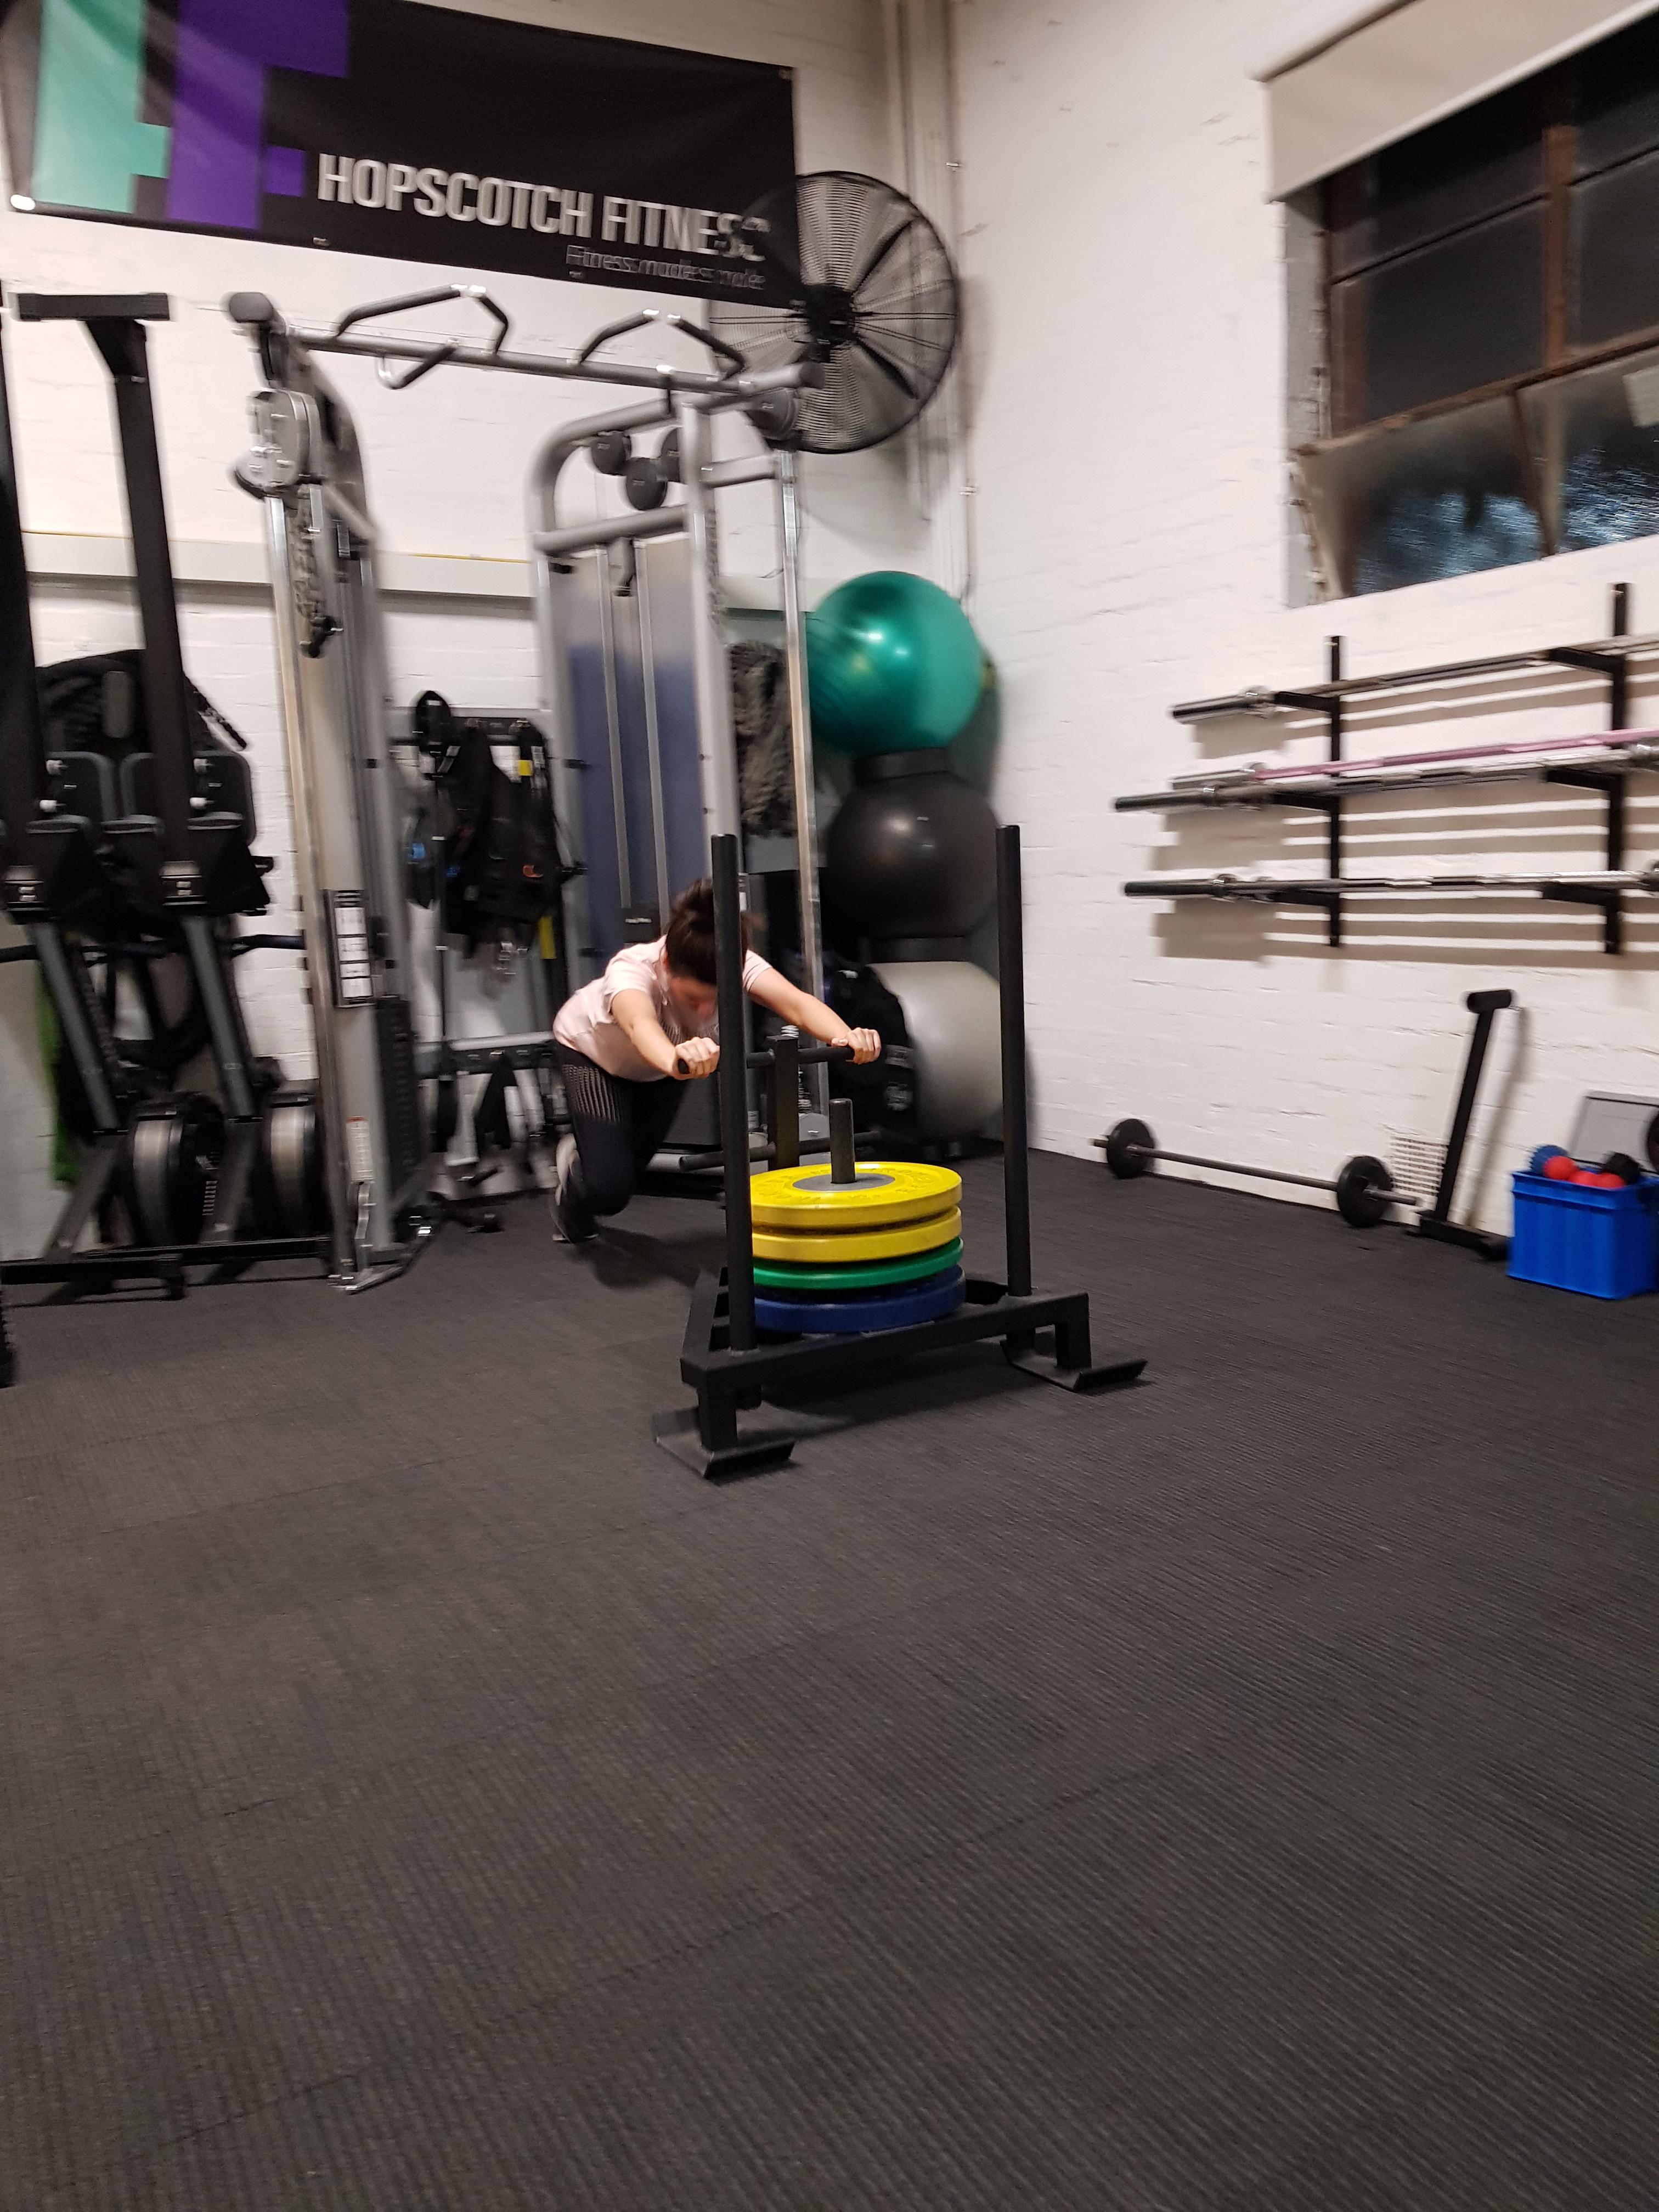 Personal training. Working out on the sled. Hopscotch Fitness Burwood (03) 9808 6942